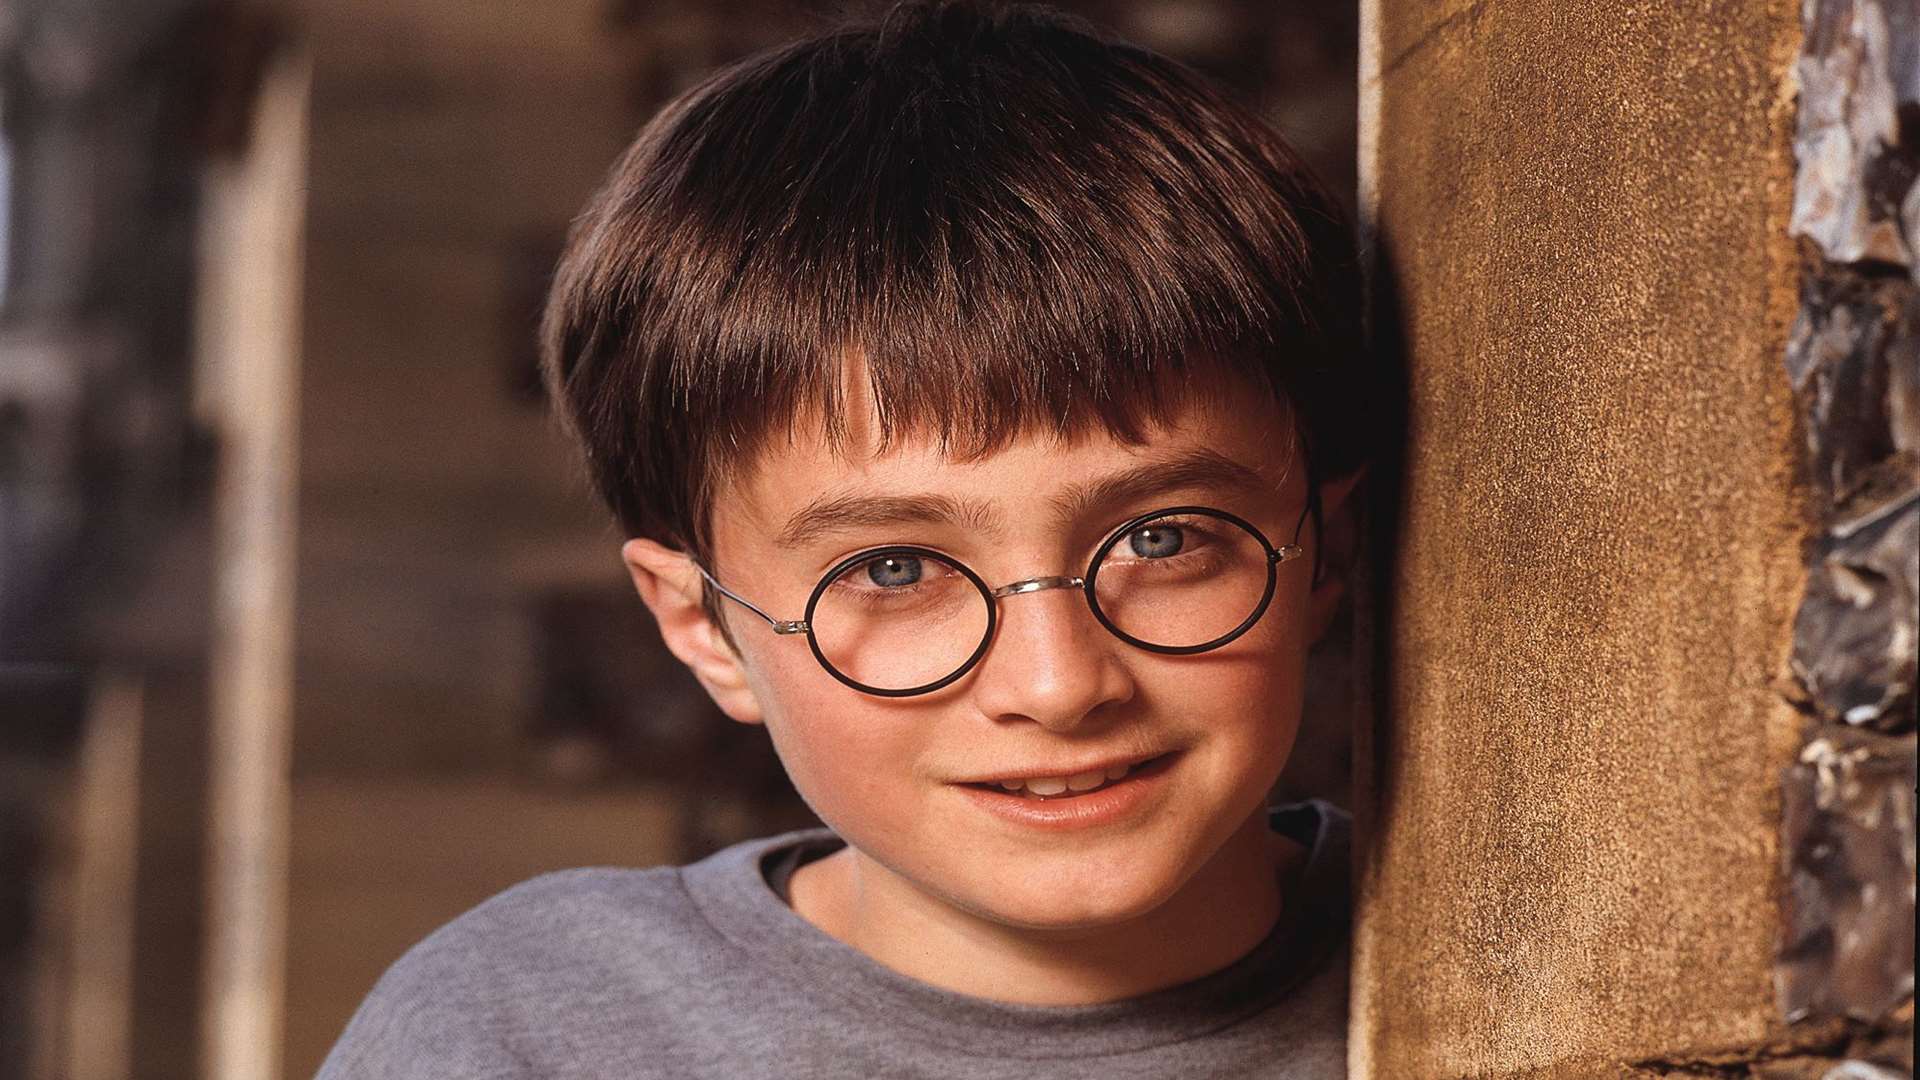 Daniel Radcliffe as a young Harry Potter Picture: Warner Brothers